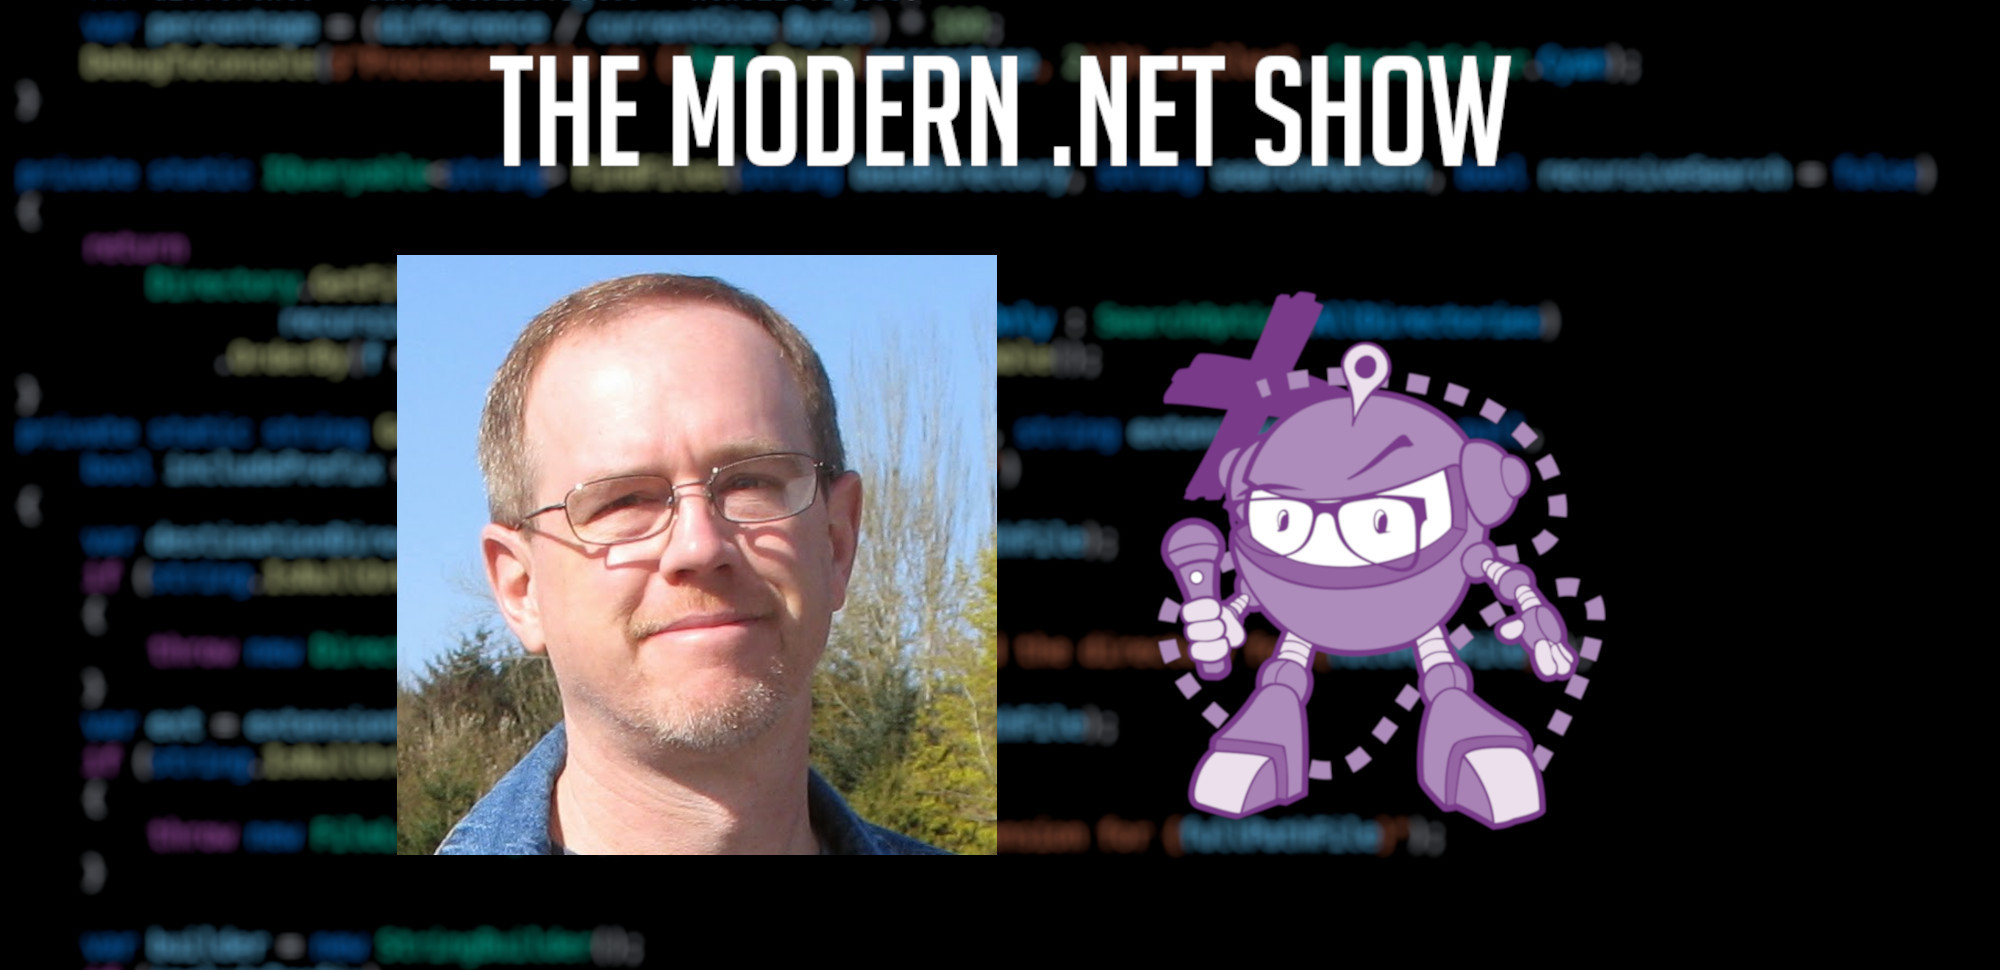 A blurry image of source code, too blurry to read, take the place of the background. Layered over that are the headshot of Scott Hunter and a purple robot holding a microphone; these are on either side of the centre of the image. Above both is the heading 'THE MODERN .NET SHOW' in bold, white text.